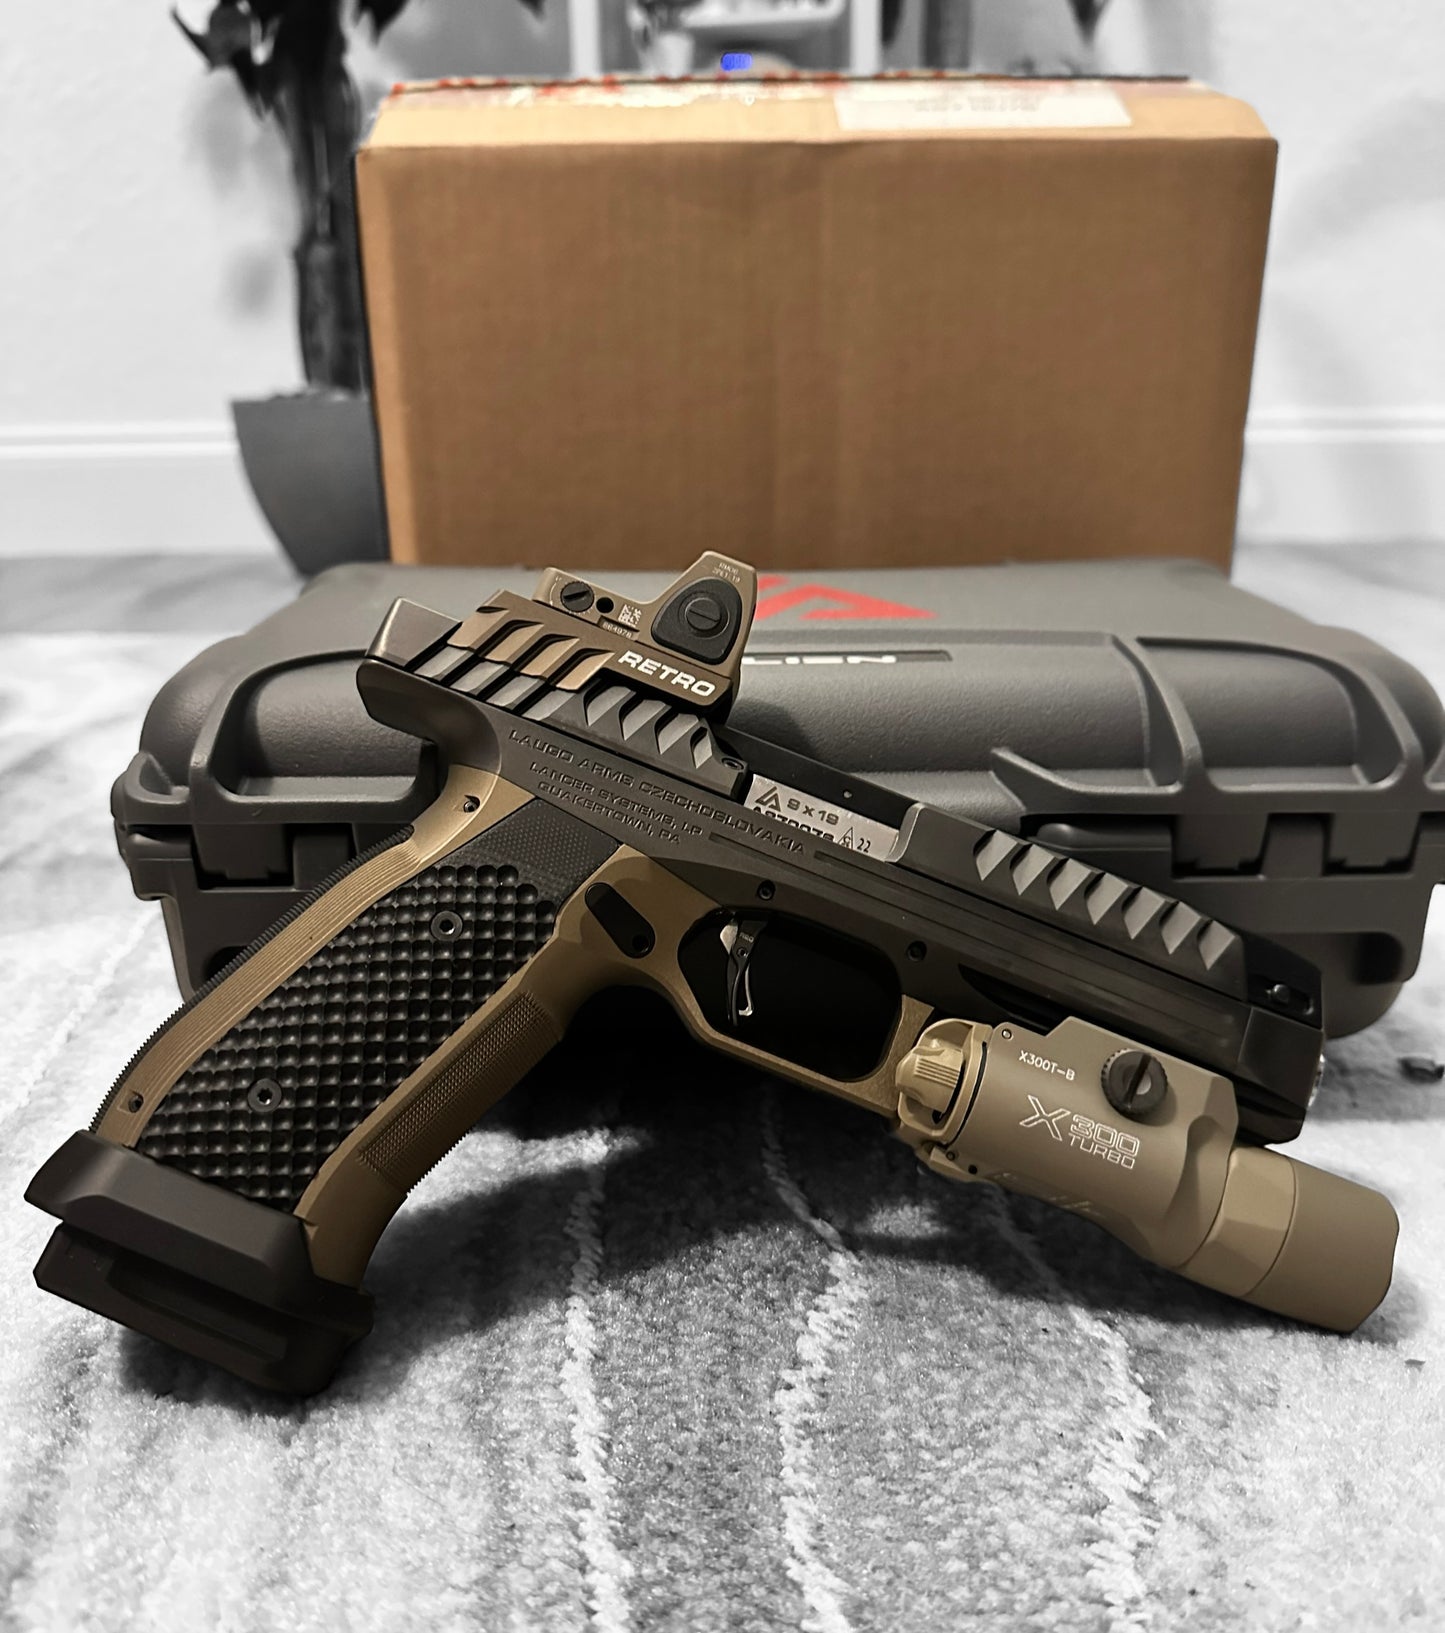 LAUGO ARMS ALIEN RETRO S/N: A270076 WITH EXTRAS